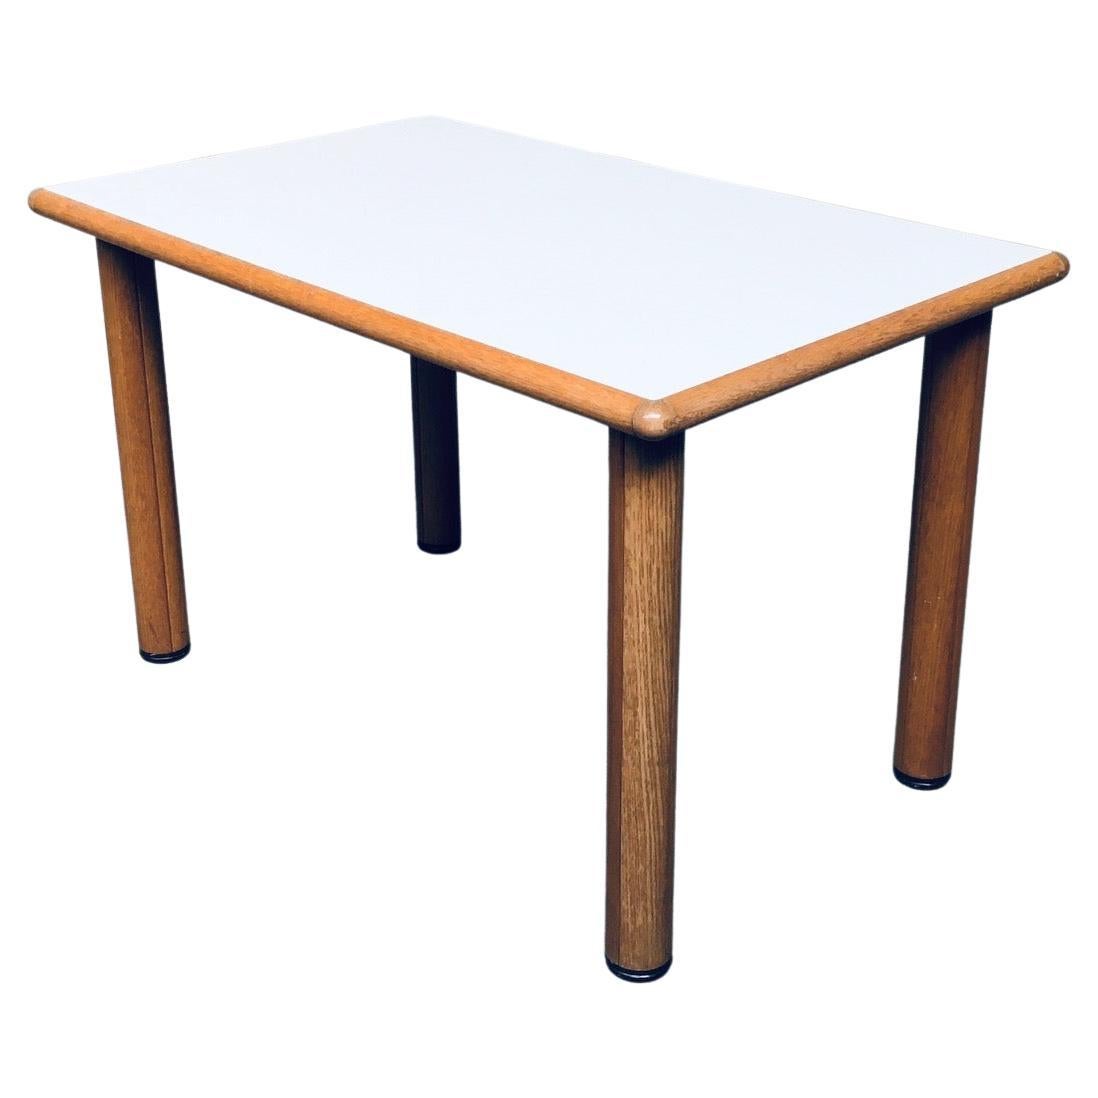 Are Formica tables durable?